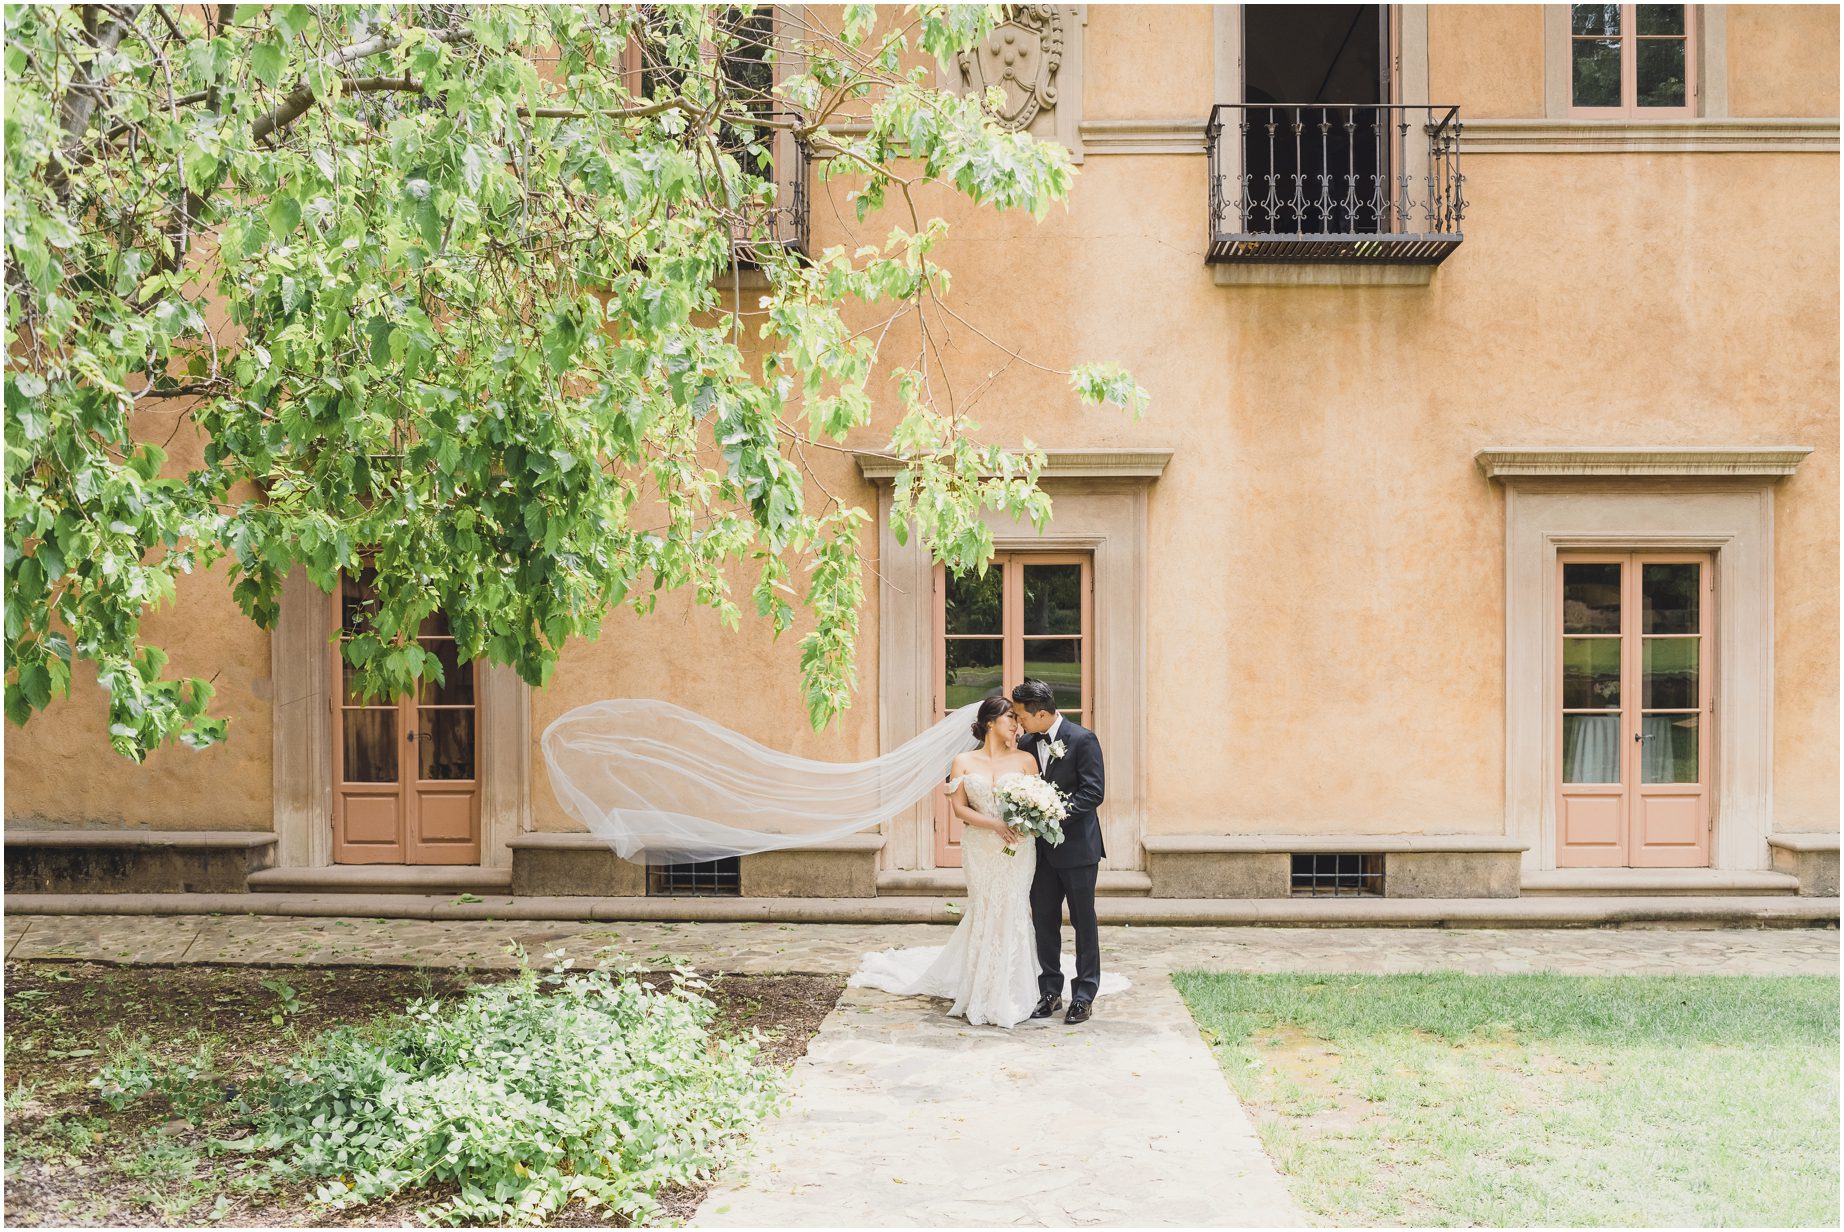 A bride and groom stand for a dreamy portrait in front of a building at Villa del sol d'Oro as the bride's veil floats in the breeze.